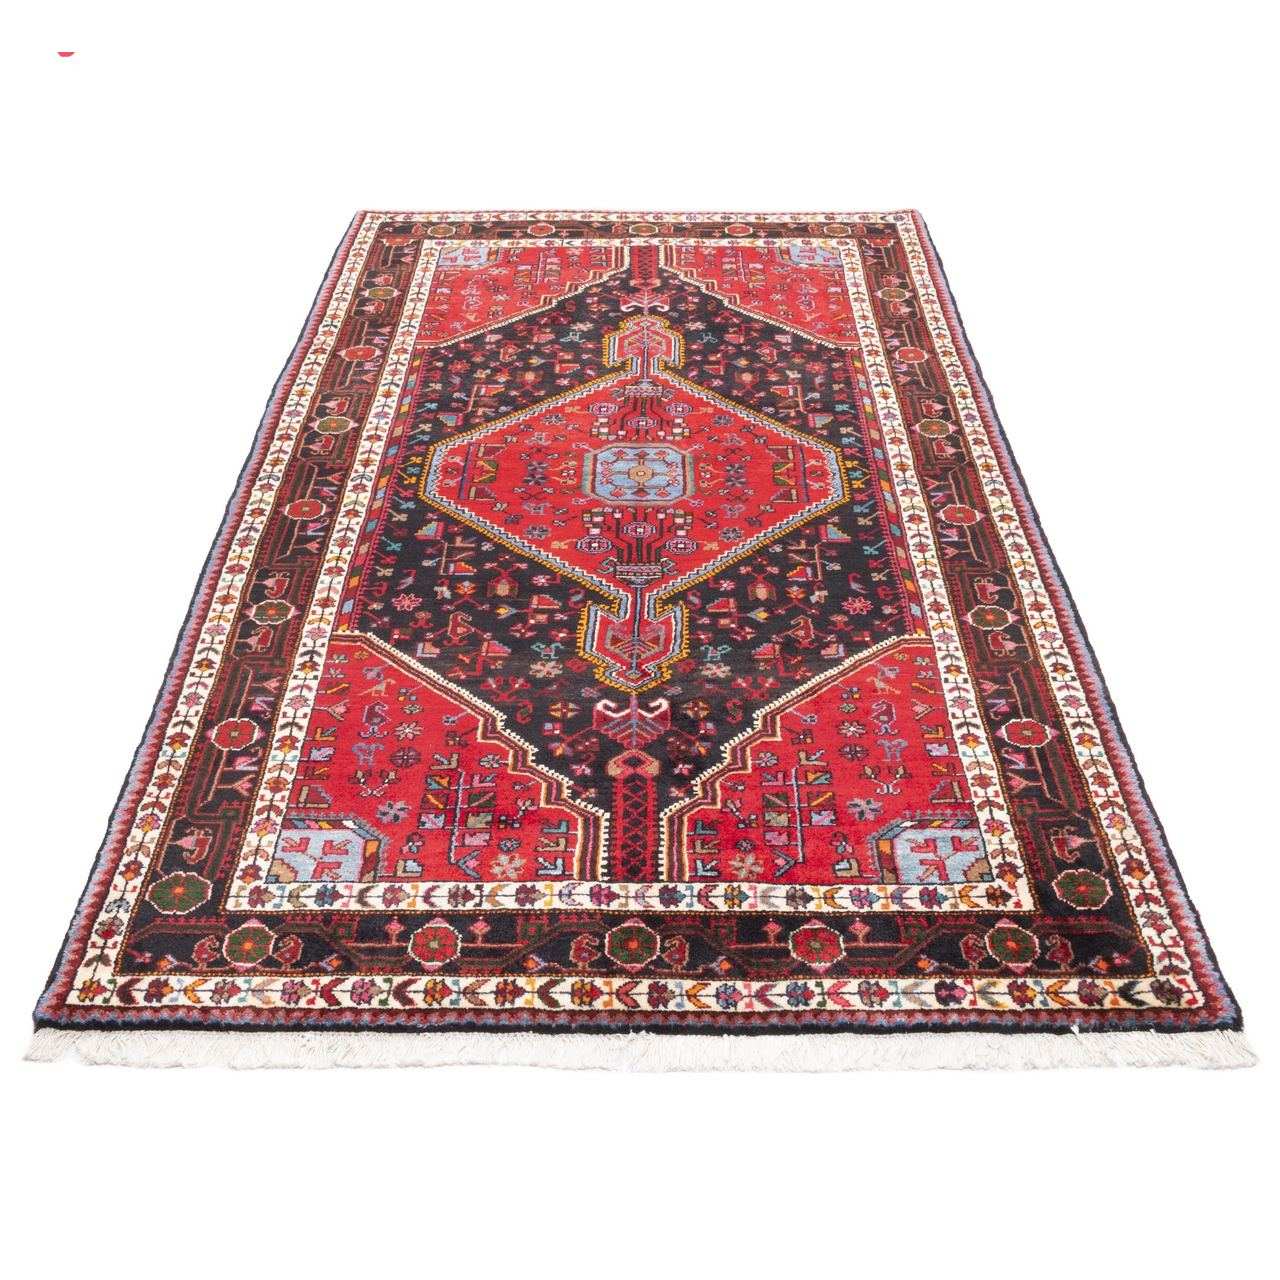 Three and a half meter handmade carpet by Persia, code 185016